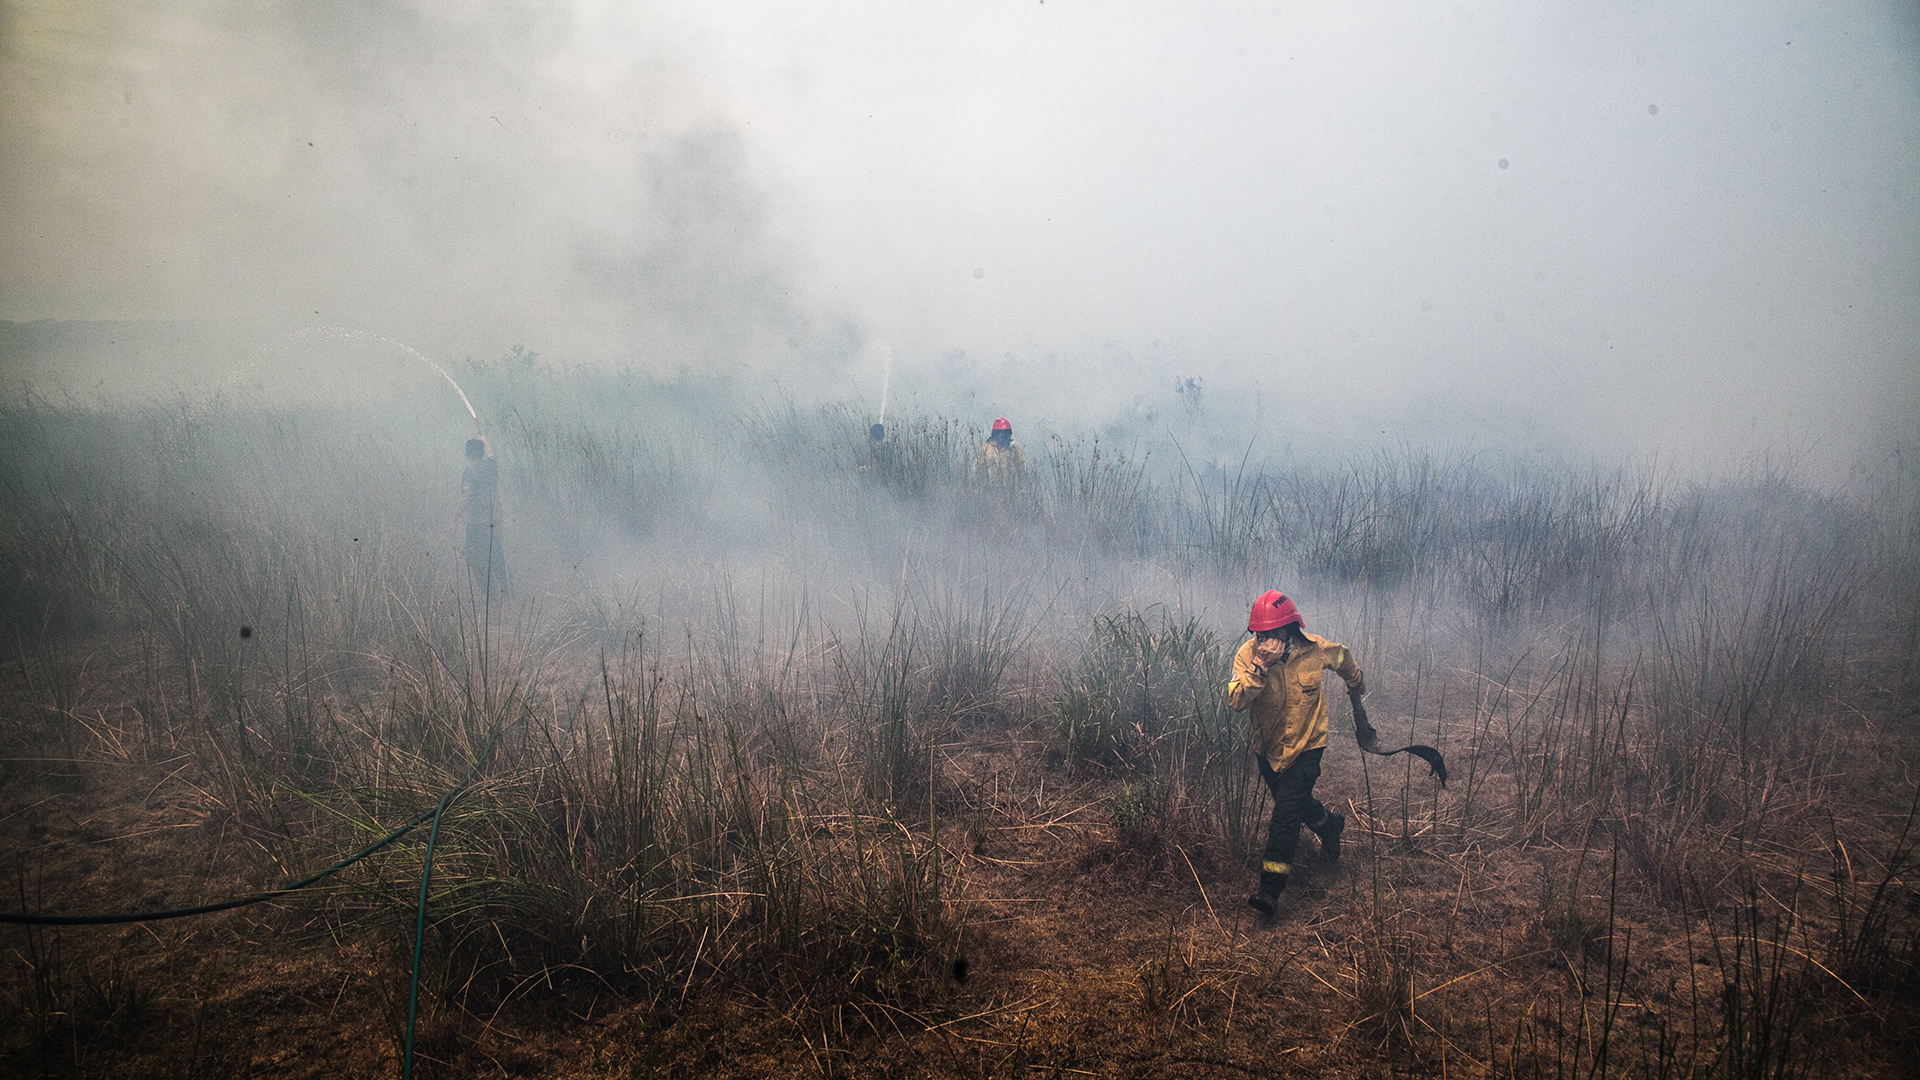 In February, wildfires fueled by severe drought consumed forests, grasslands and wetlands in northeastern Argentina and burned an estimated 40% of Ibera National Park.